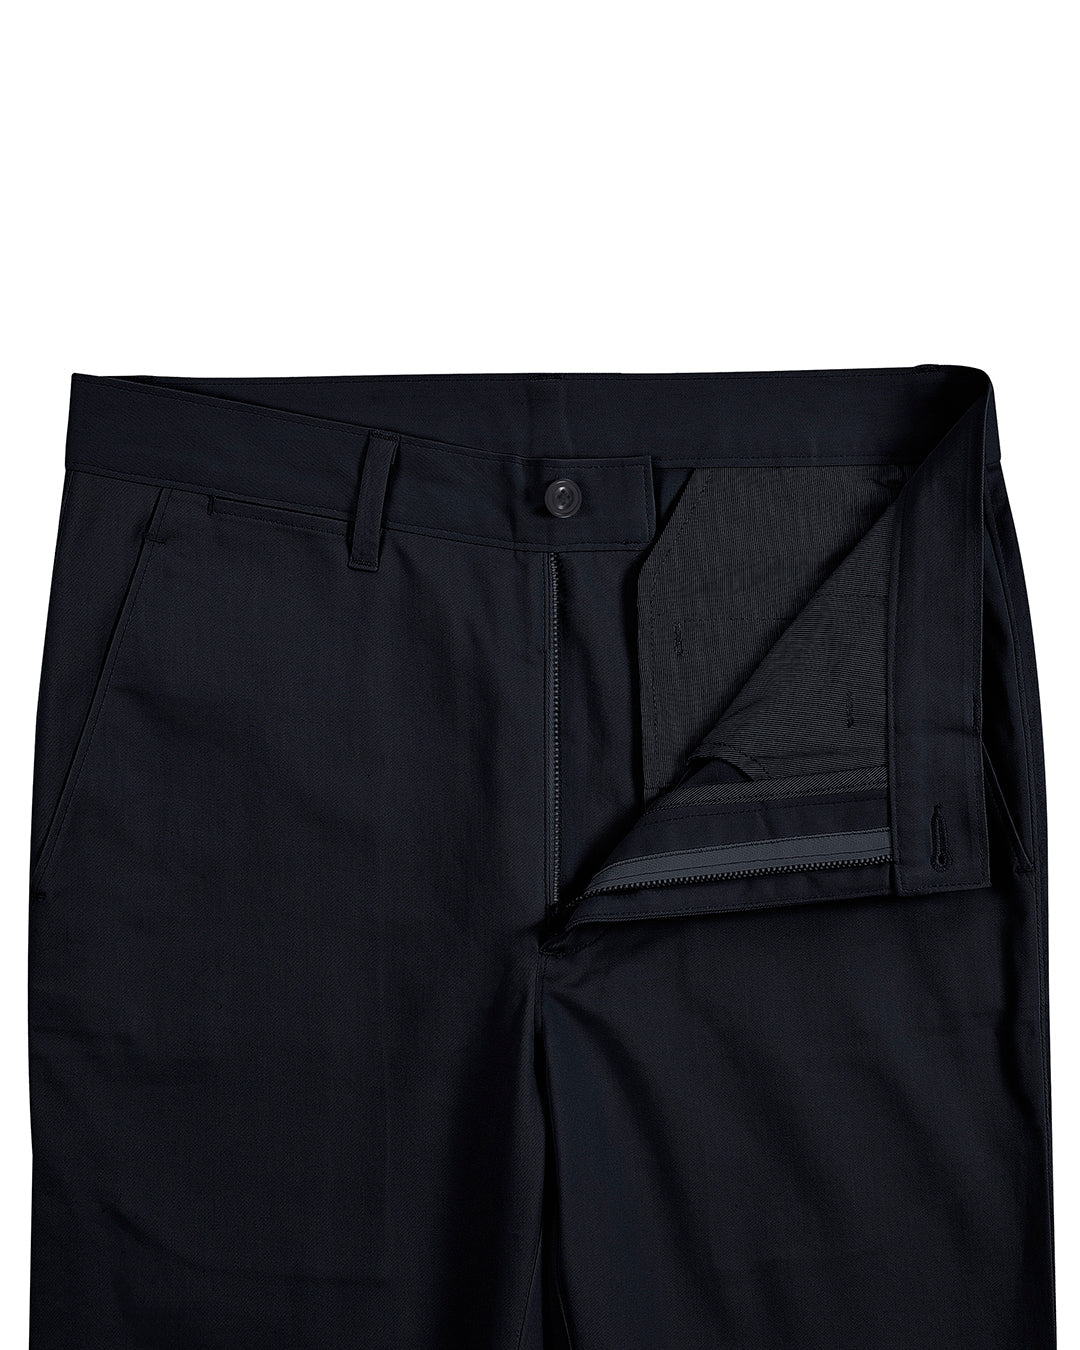 Open front view of custom Genoa Chino pants for men by Luxire in navy